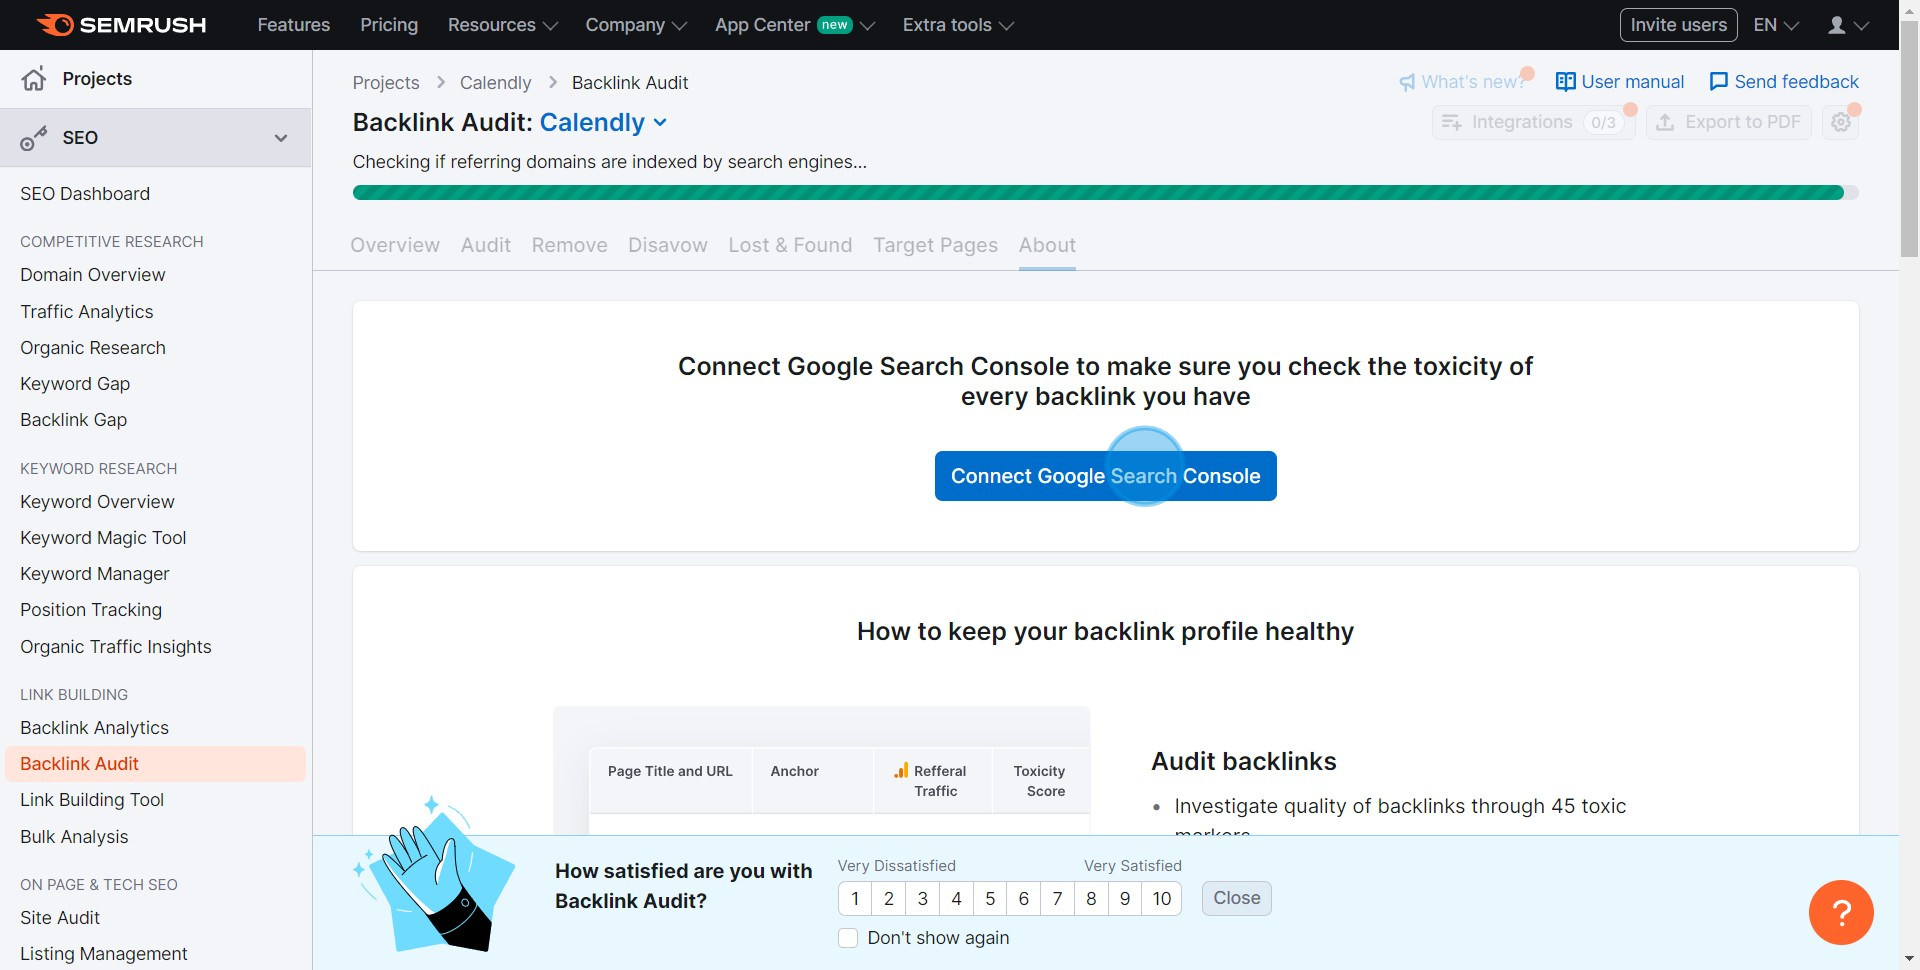 7 Click on "Connect Google Search Console"